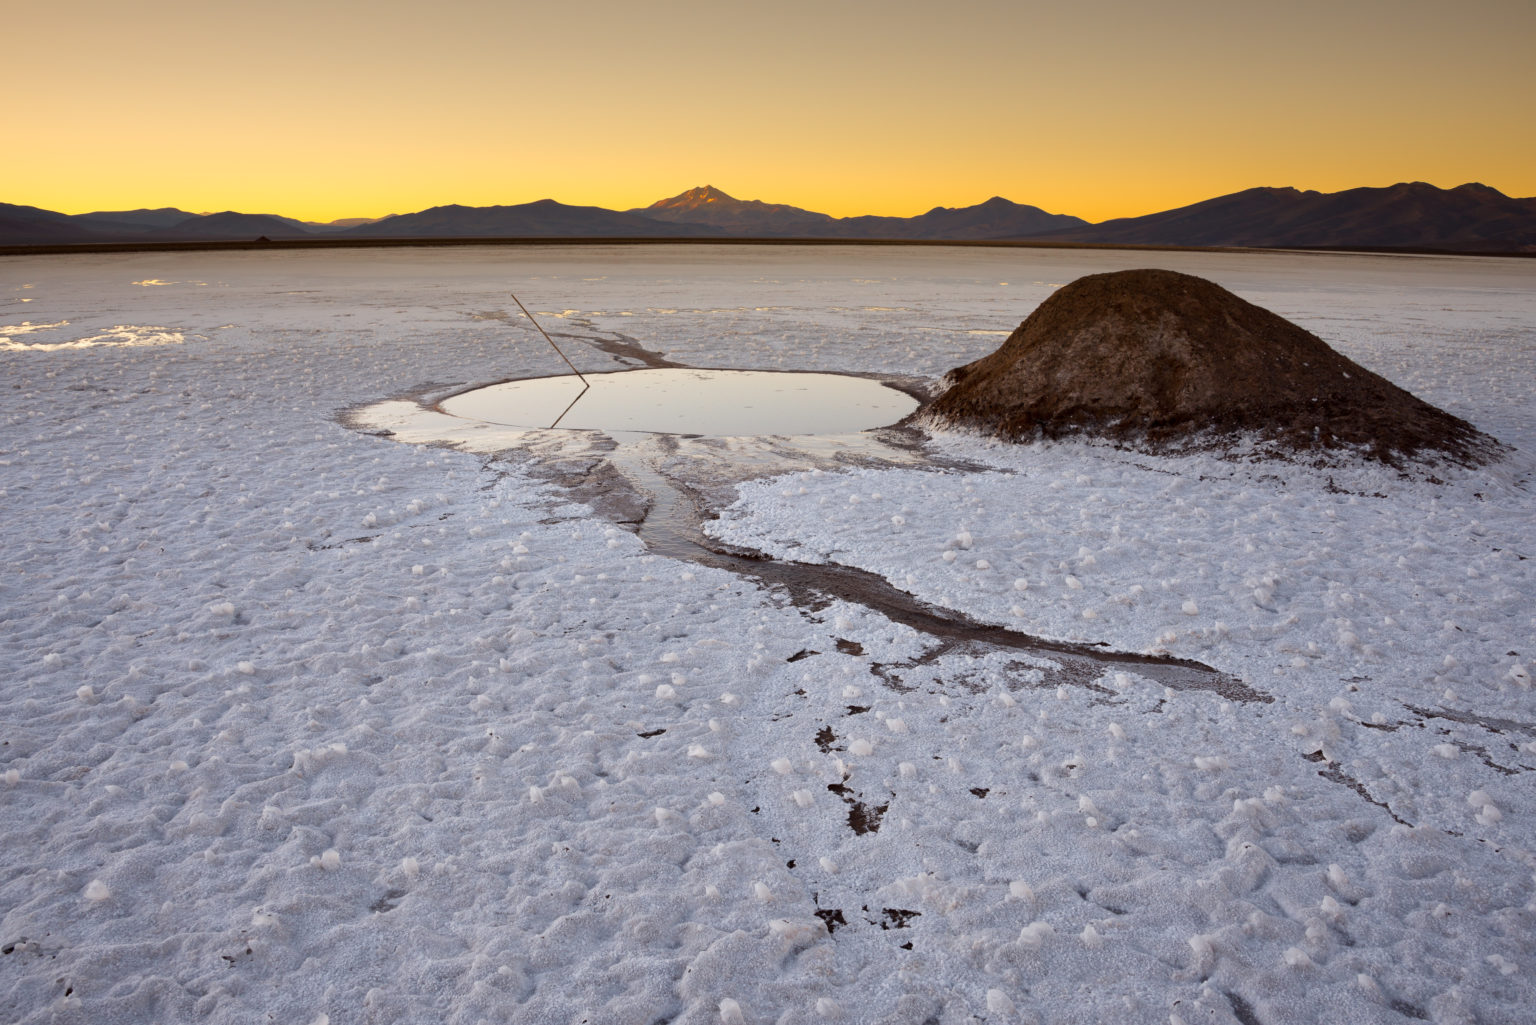 Lithium venture in Chile in talks with EV firms to invest in mine project